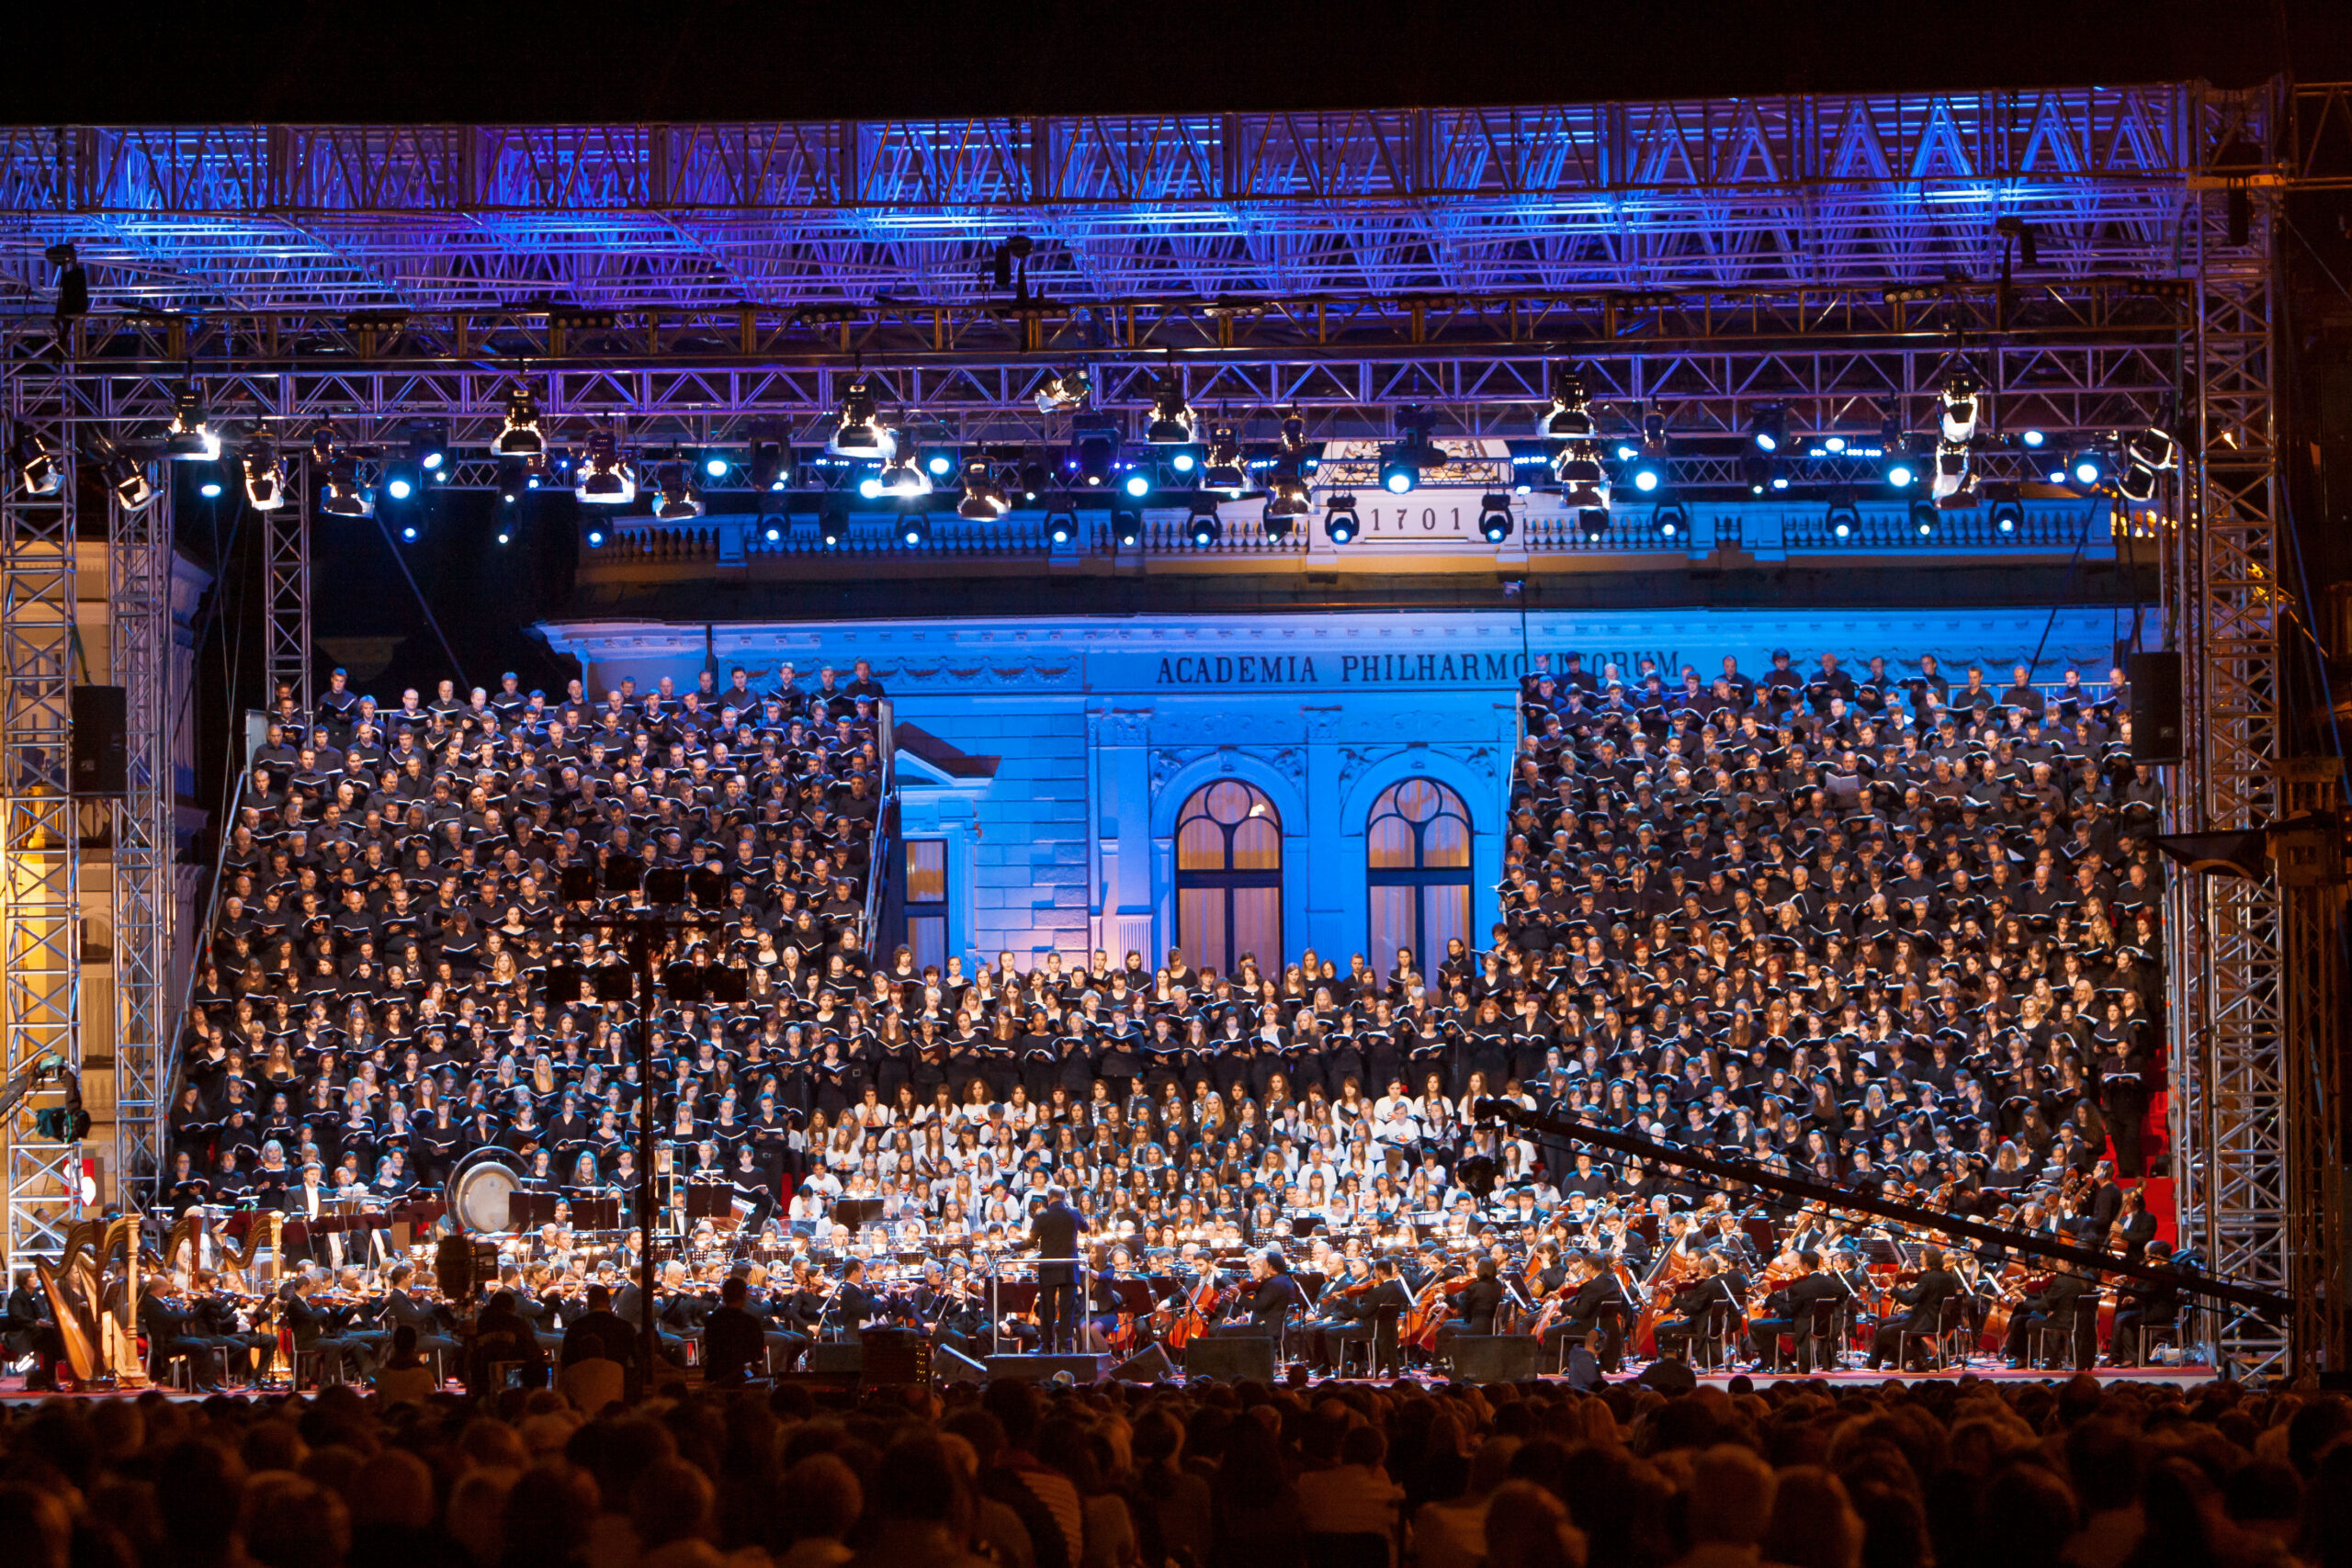 Janez Kotar, Slovenia: Symphony of a Thousand, 2011, Slovenia - On the 20th anniversary of Slovenia’s independence, the Slovenian Philharmonic Orchestra and the Zagreb Philharmonic Orchestra performed Mahler’s Symphony No. 8 under the baton of Valery Gergiev. The united choir consisted of 950 singers from 21 Slovenian and Croatian choirs.